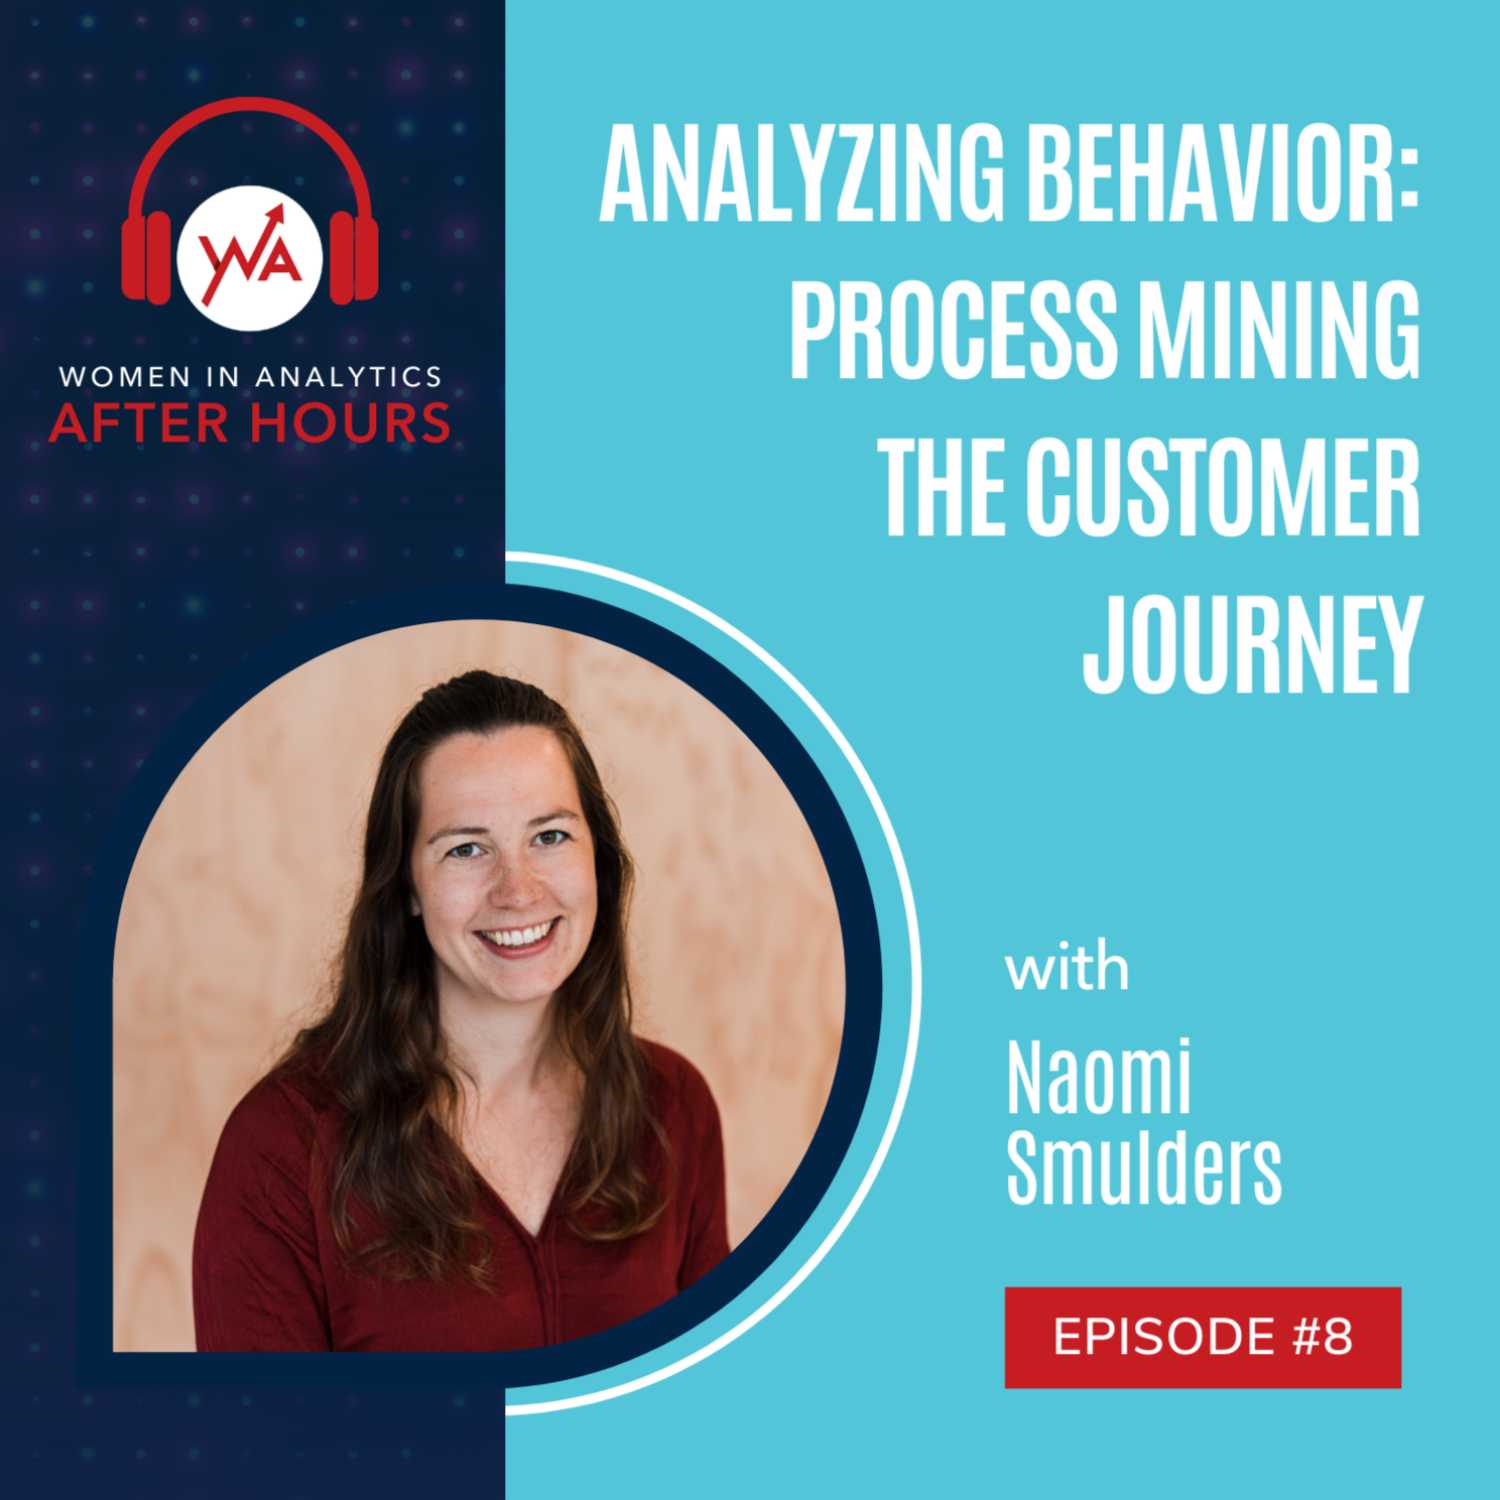 Episode 8 - Analyzing Behavior: Process Mining the Customer Journey with Naomi Smulders